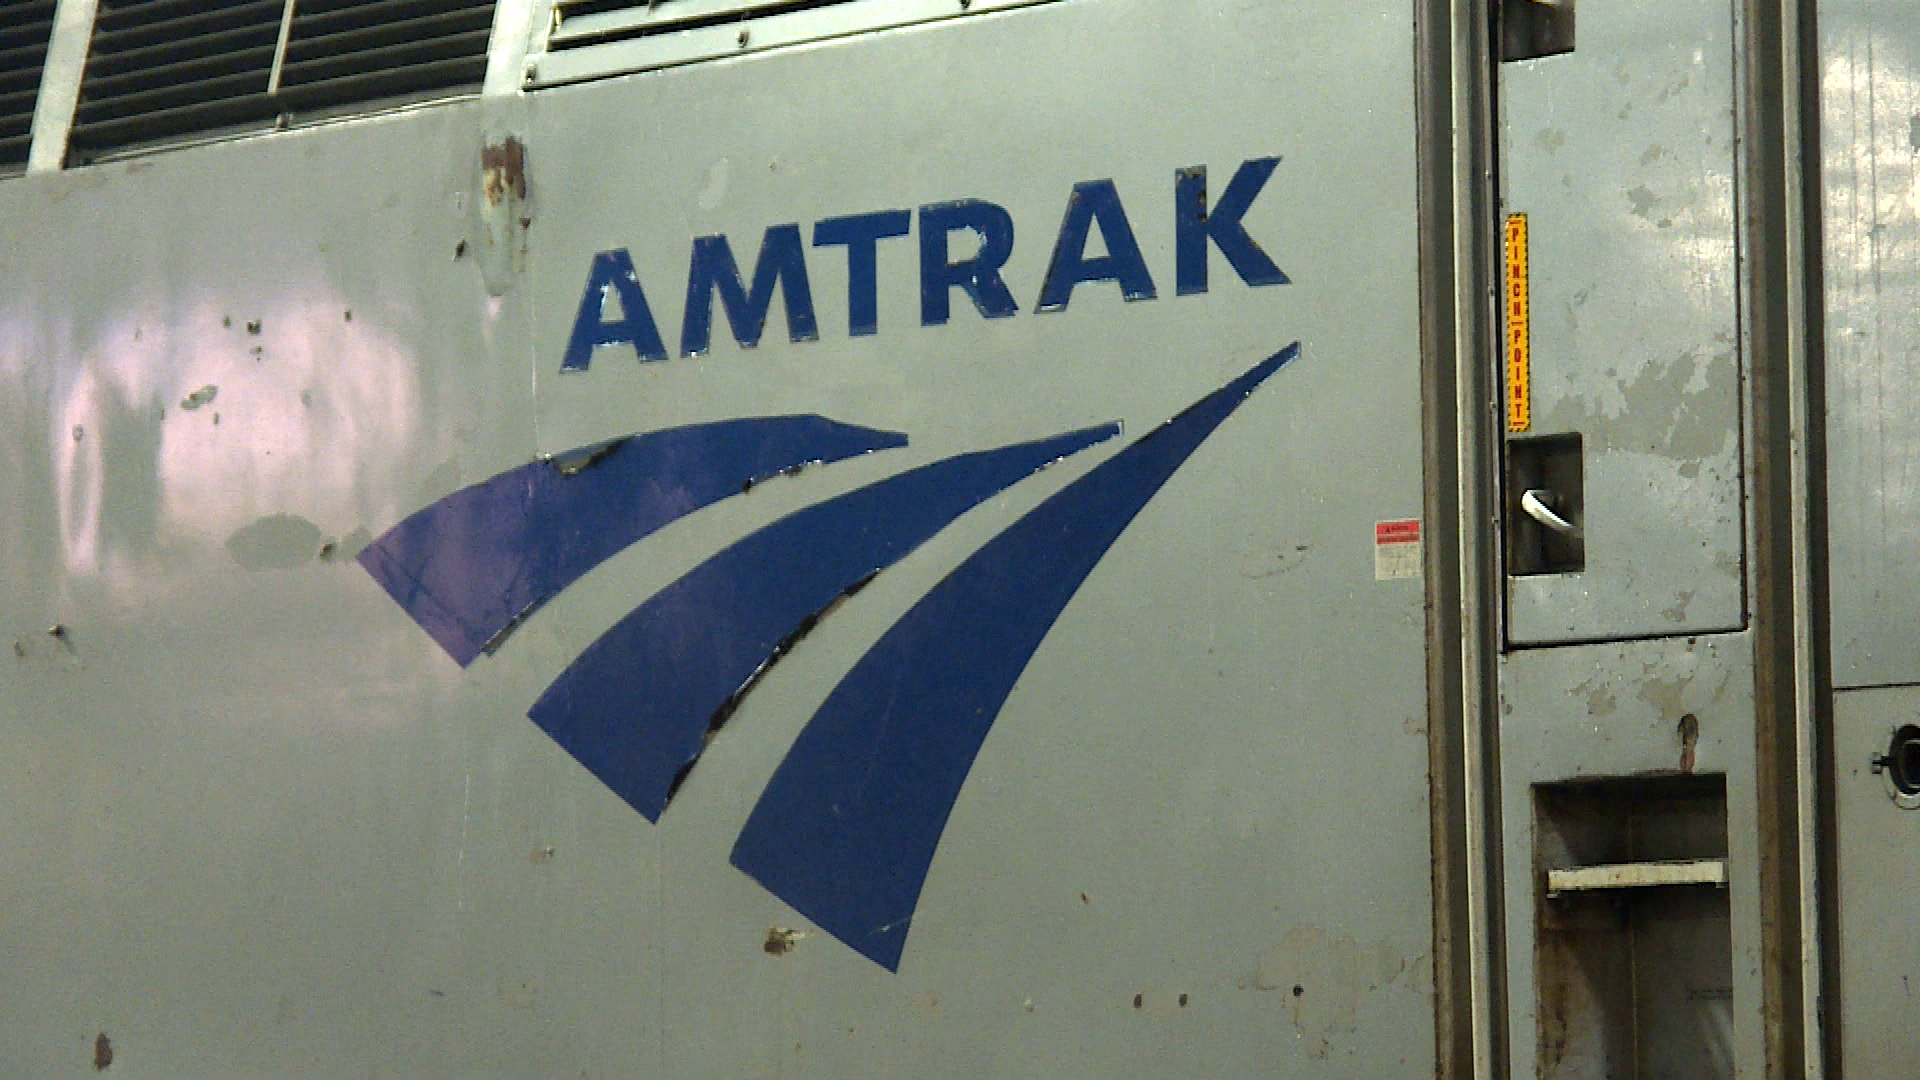 The side of an Amtrak train.